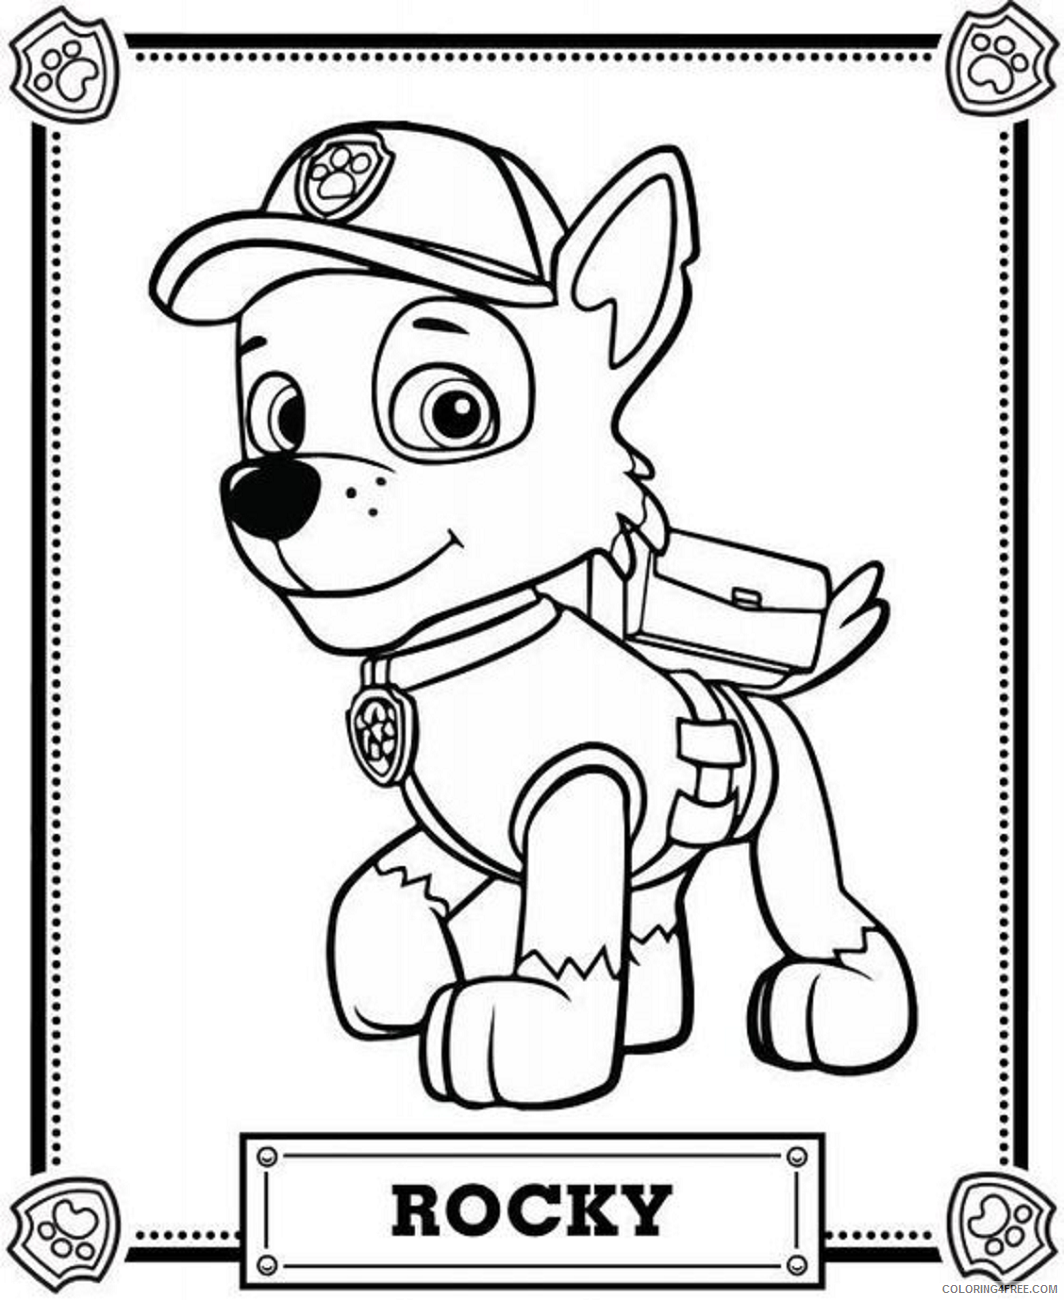 Paw Patrol Coloring Pages TV Film rocky_in_paw_patrol a4 Printable 2020 05885 Coloring4free